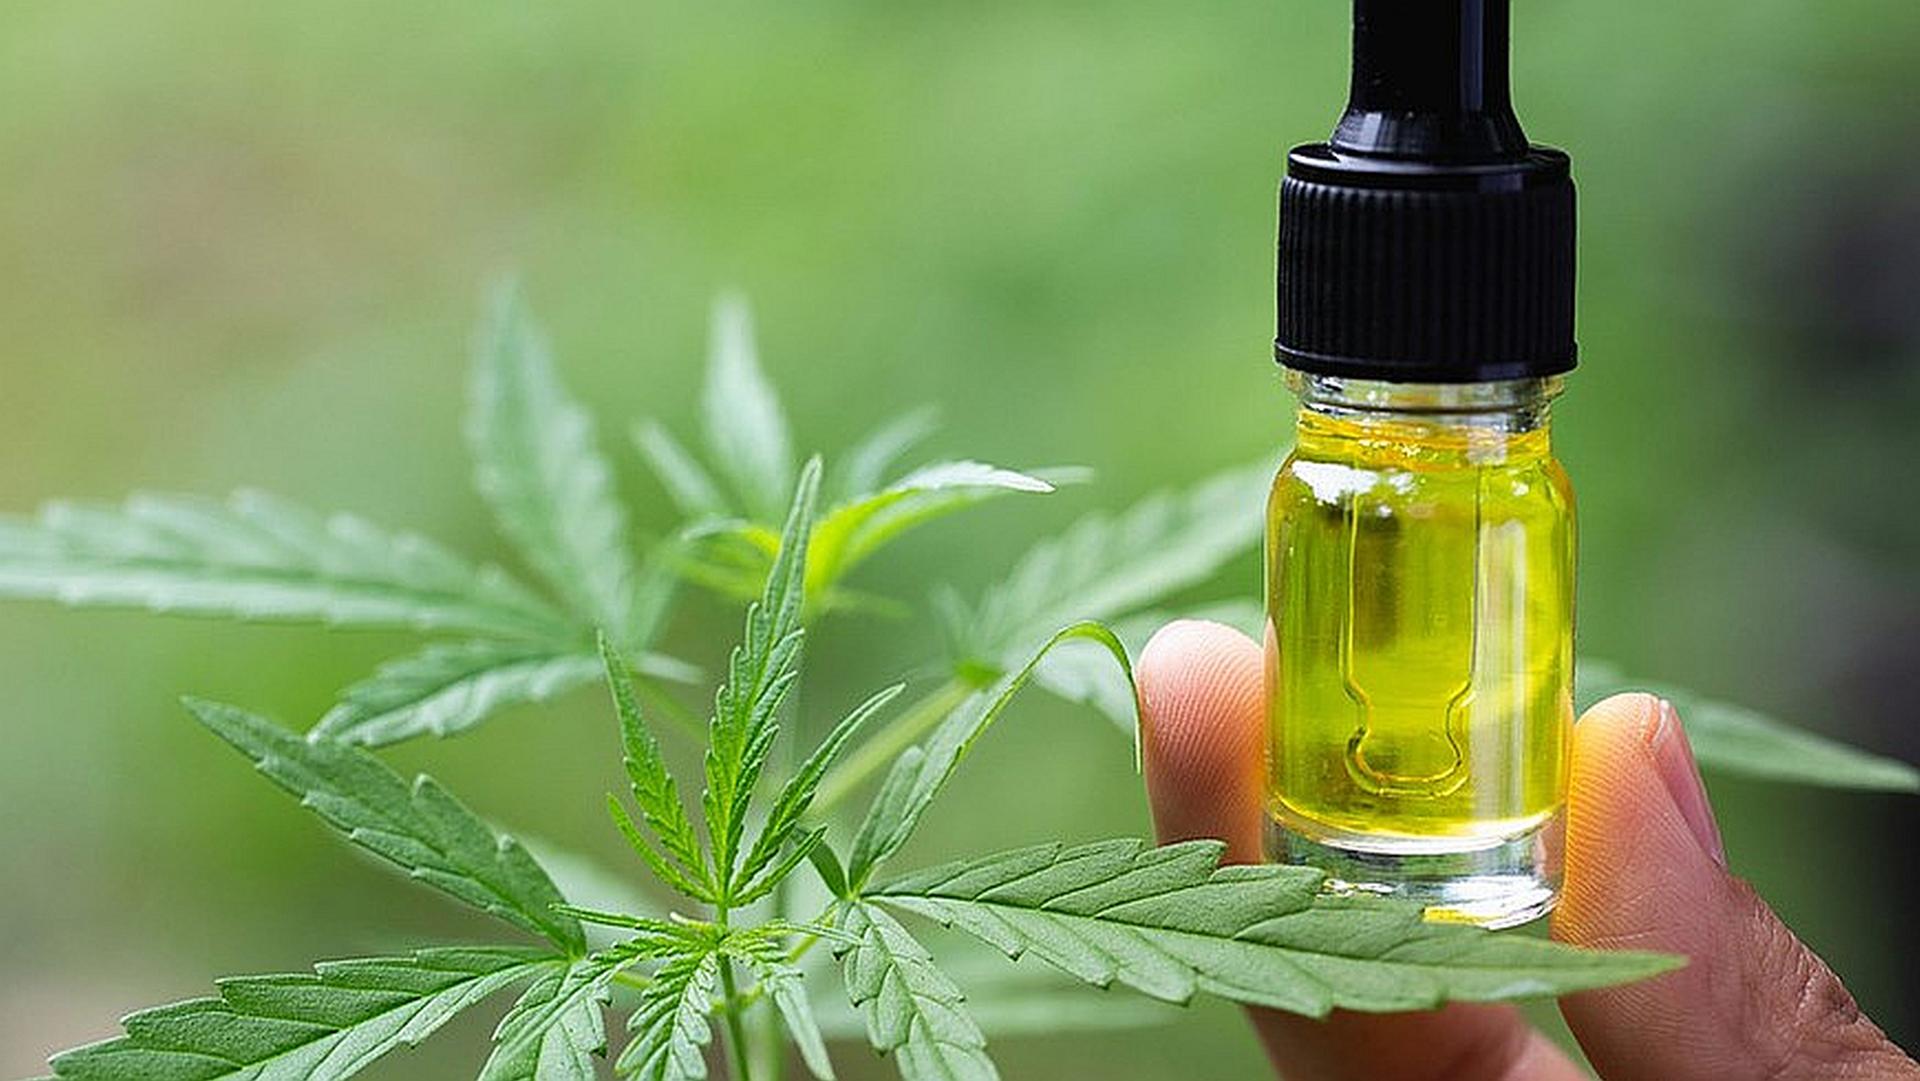 What are the Best cbd oils for cats to buy in 2019?